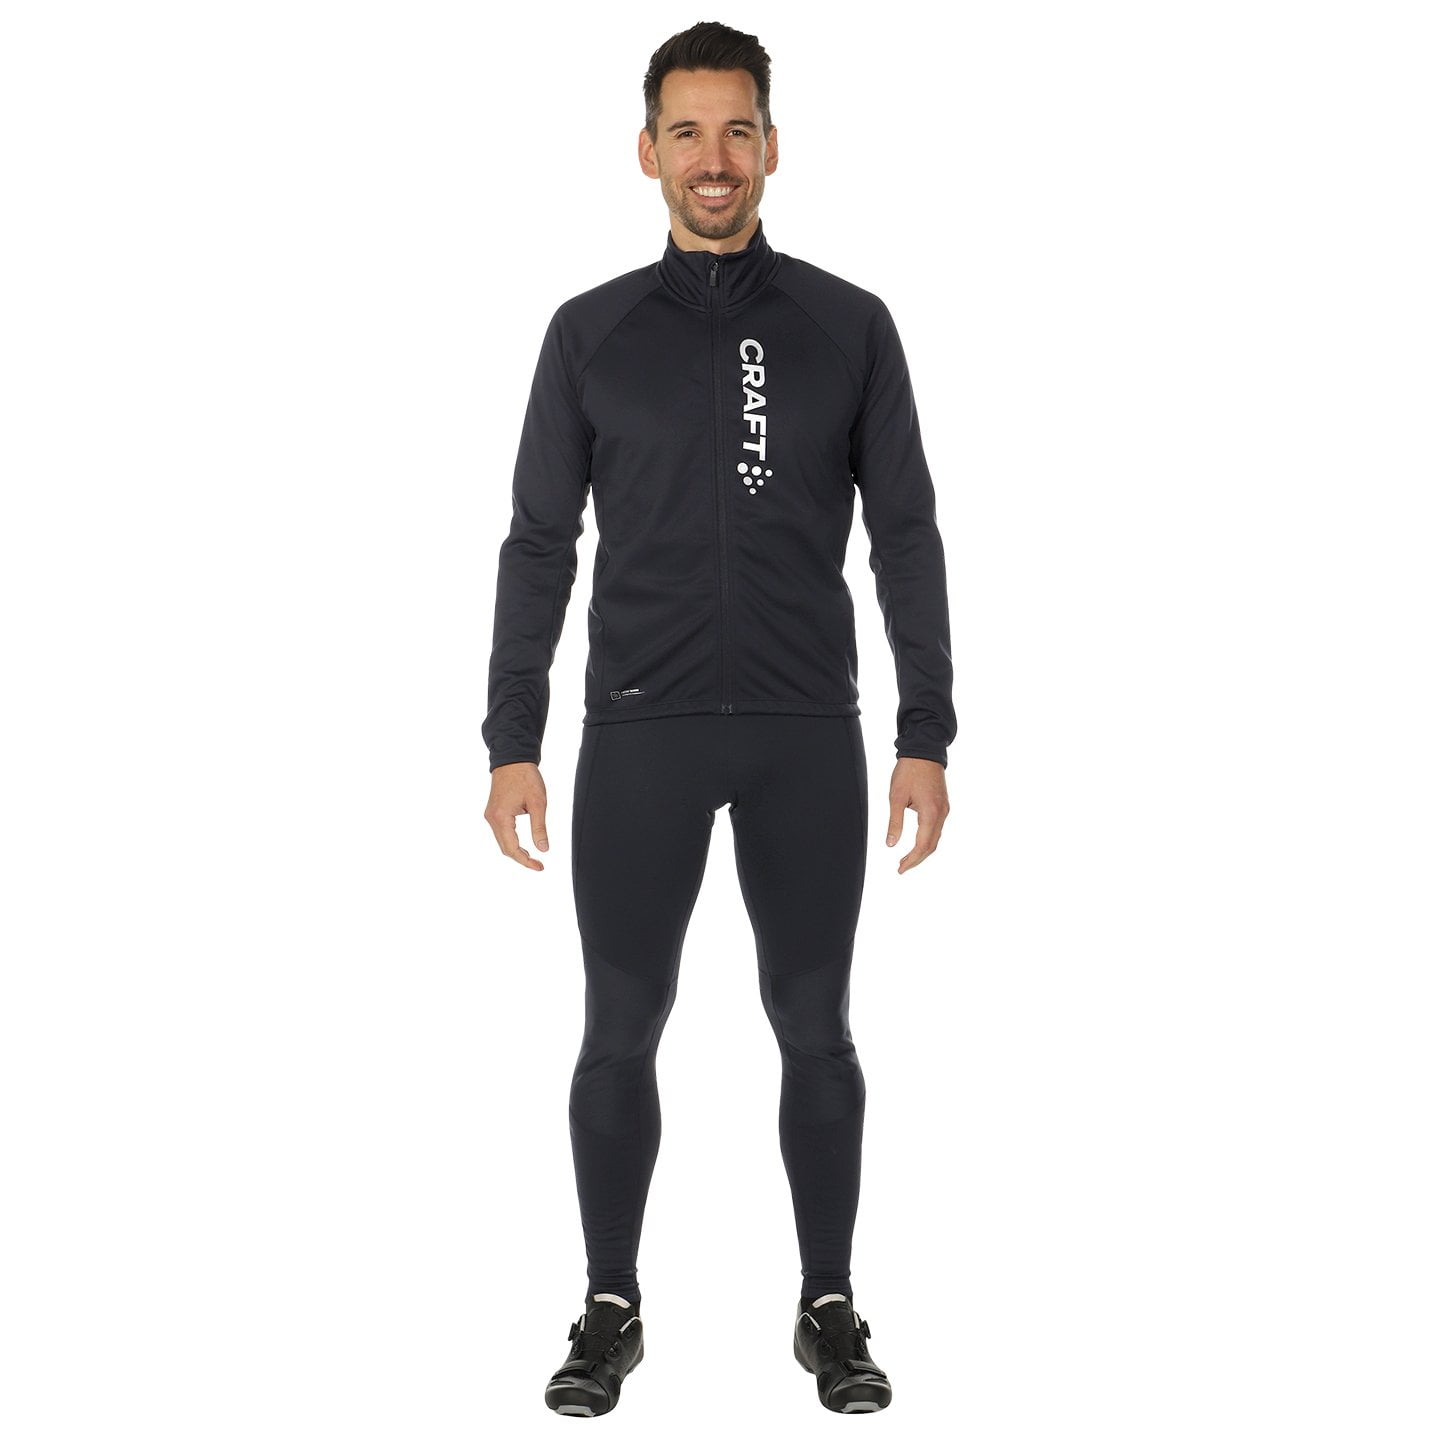 CRAFT Core SubZ Set (winter jacket + cycling tights) Set (2 pieces), for men